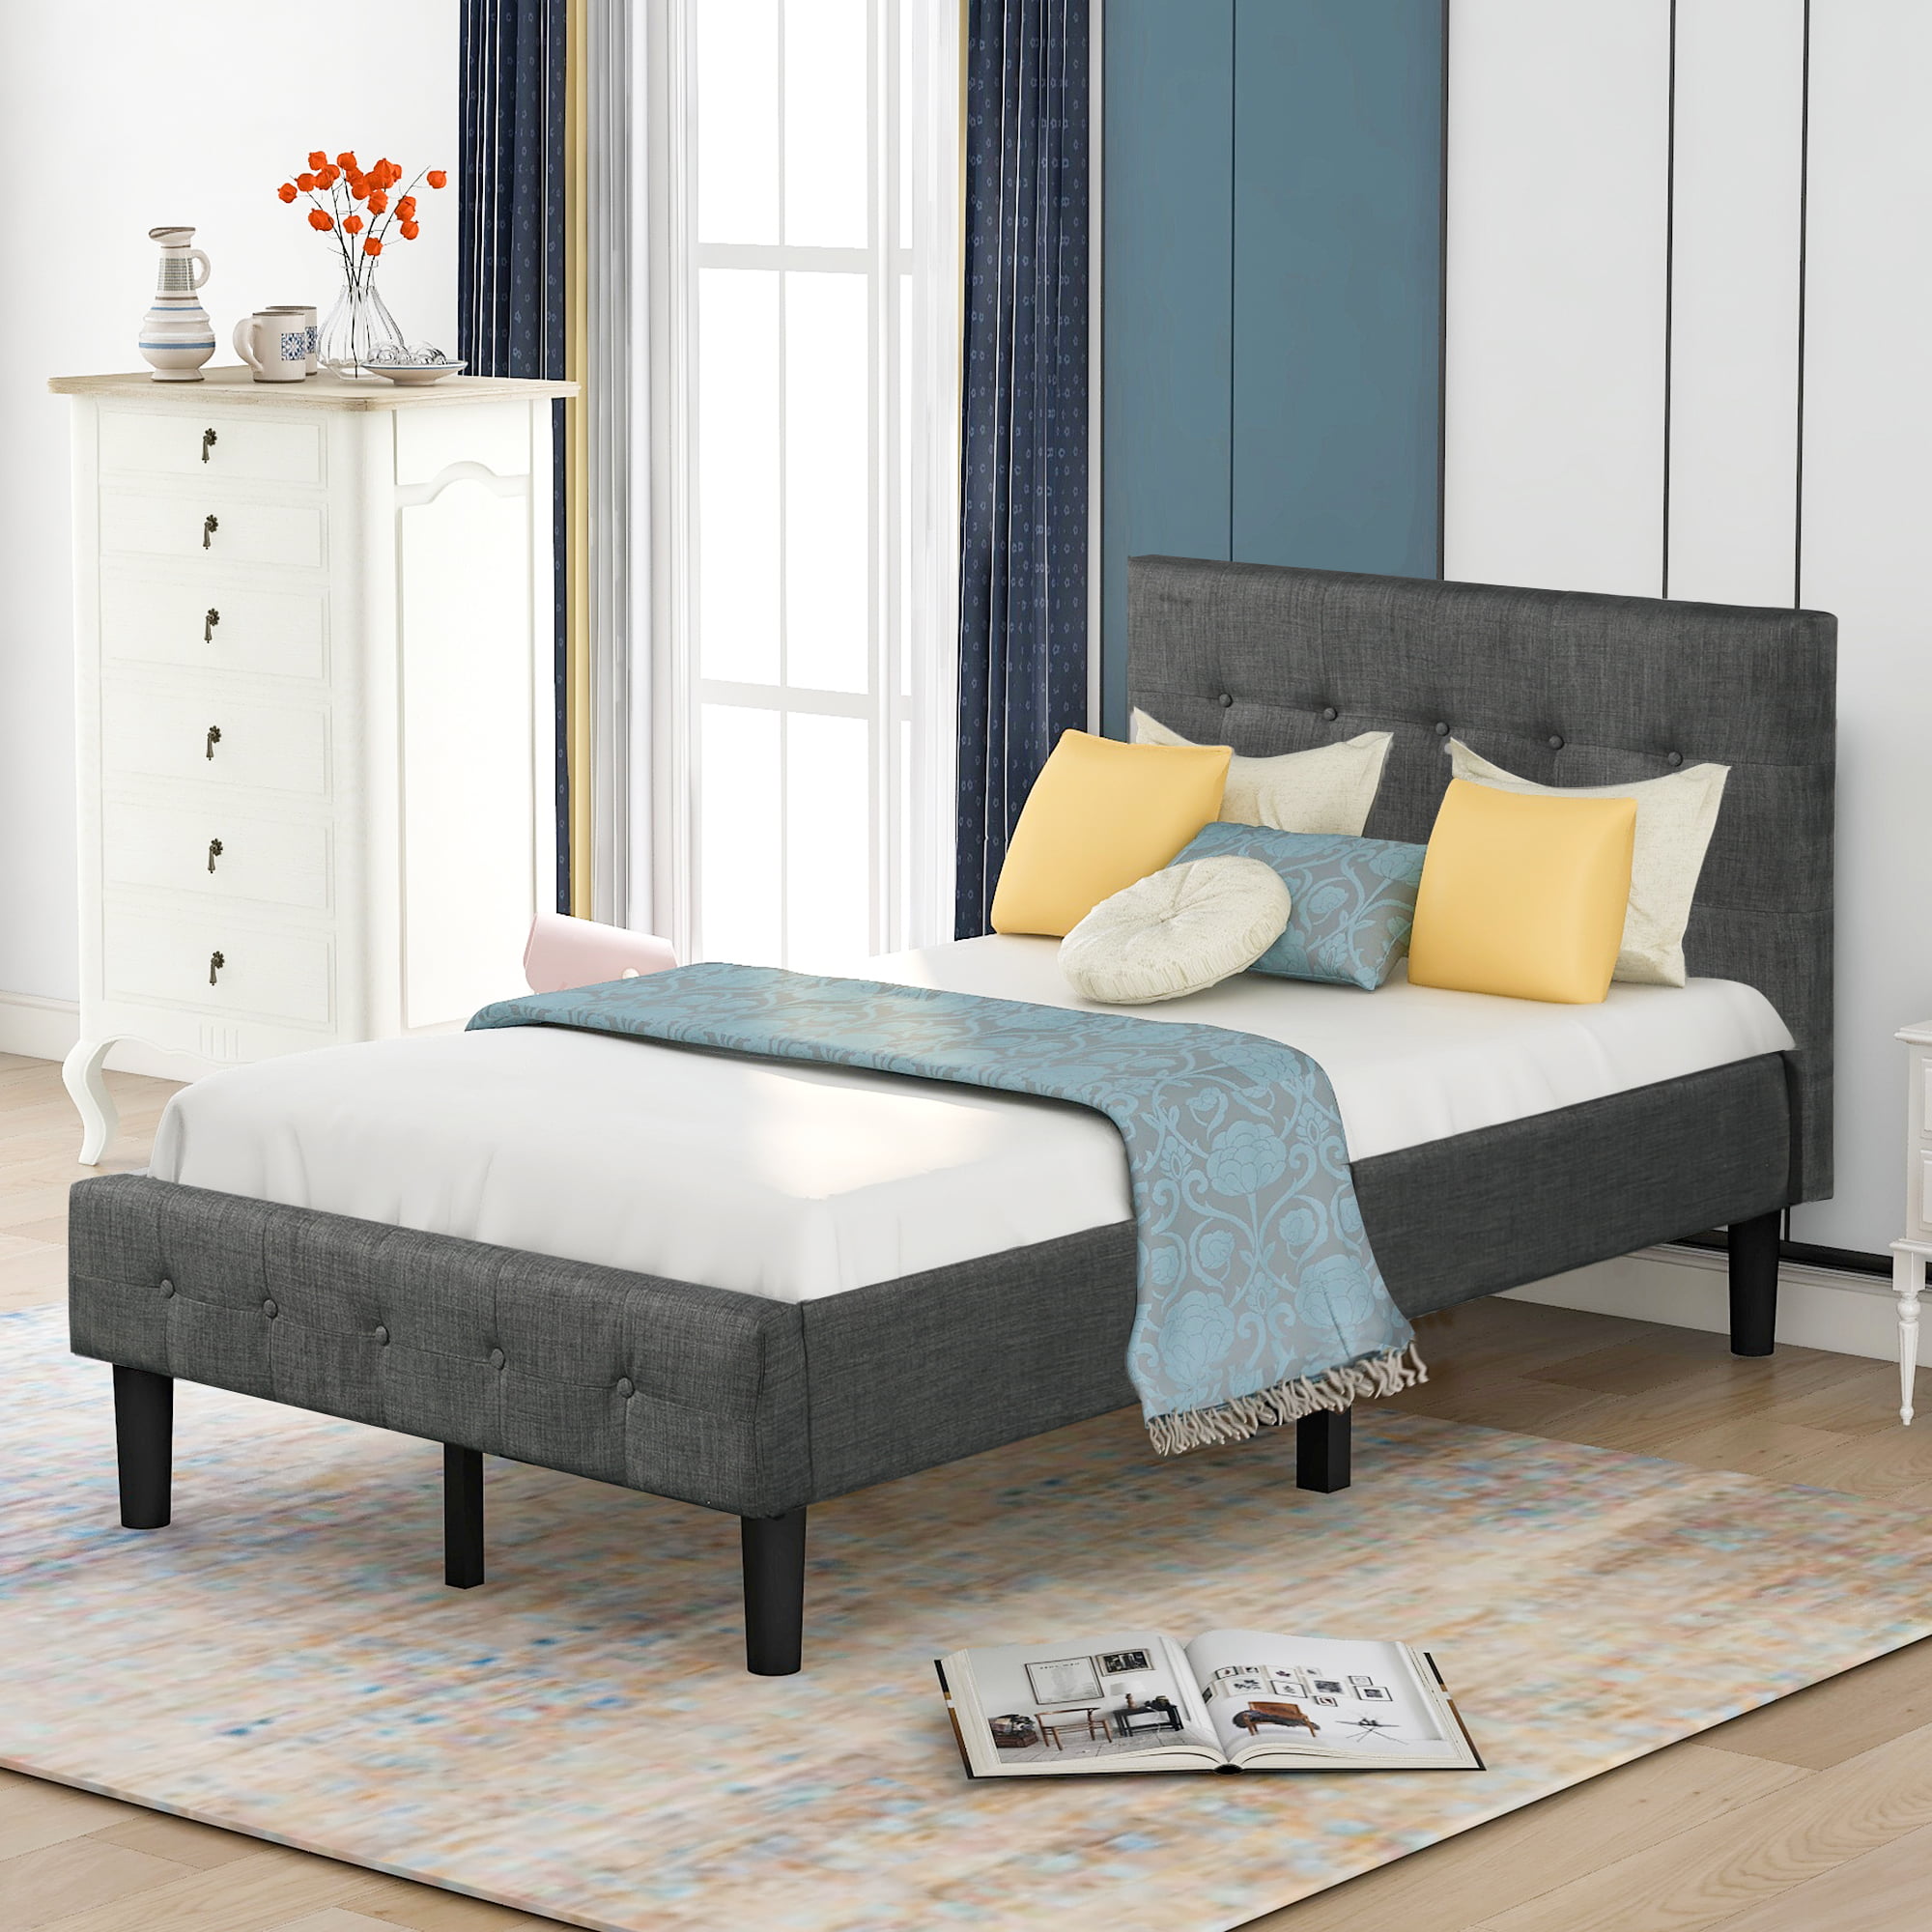 Twin Platform Bed Frame with Headboard, Heavy Duty Fabric Upholstered